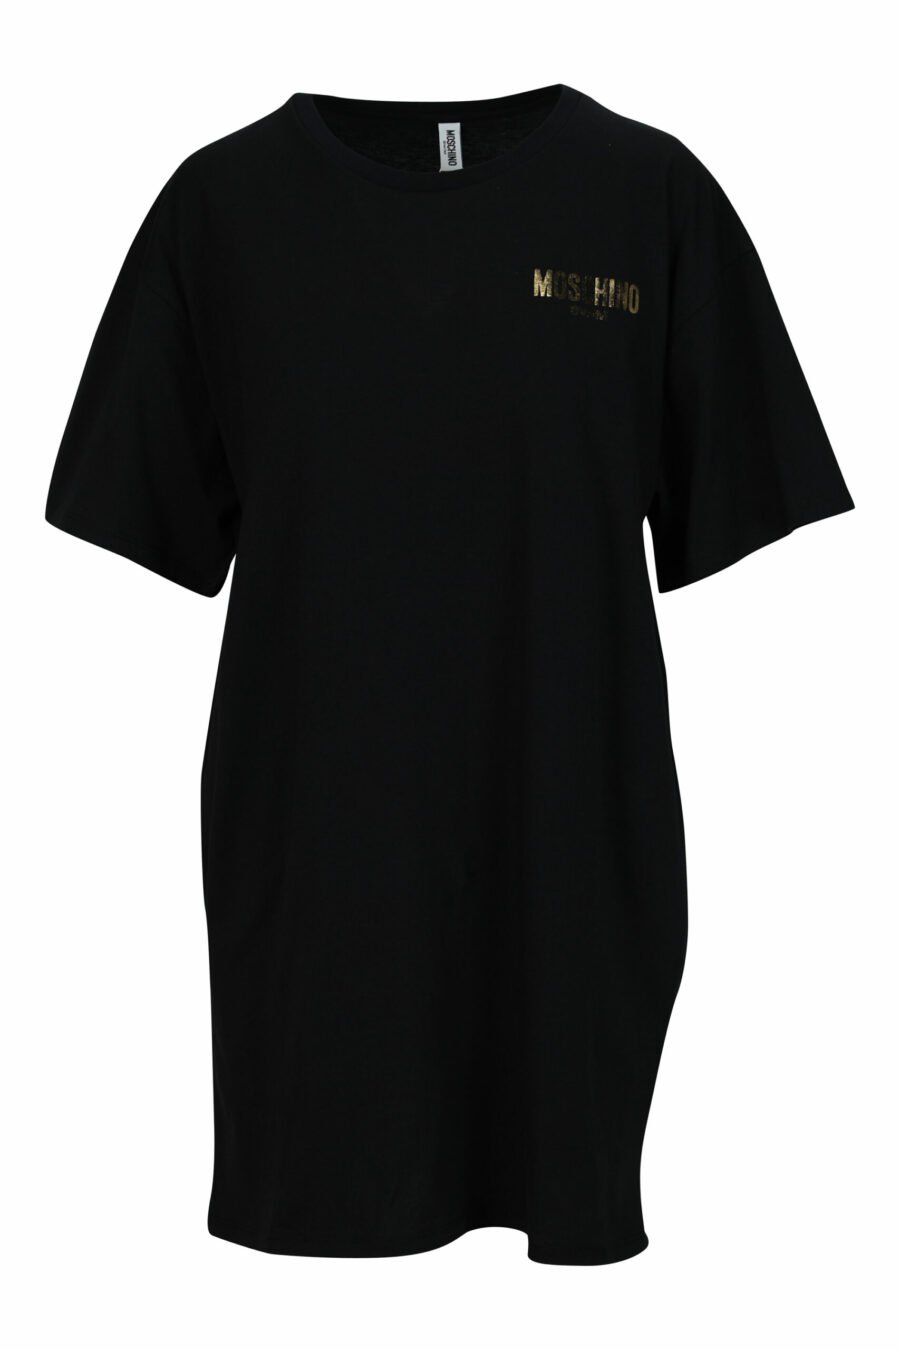 Black dress with gold lettering logo - 667113355863 scaled